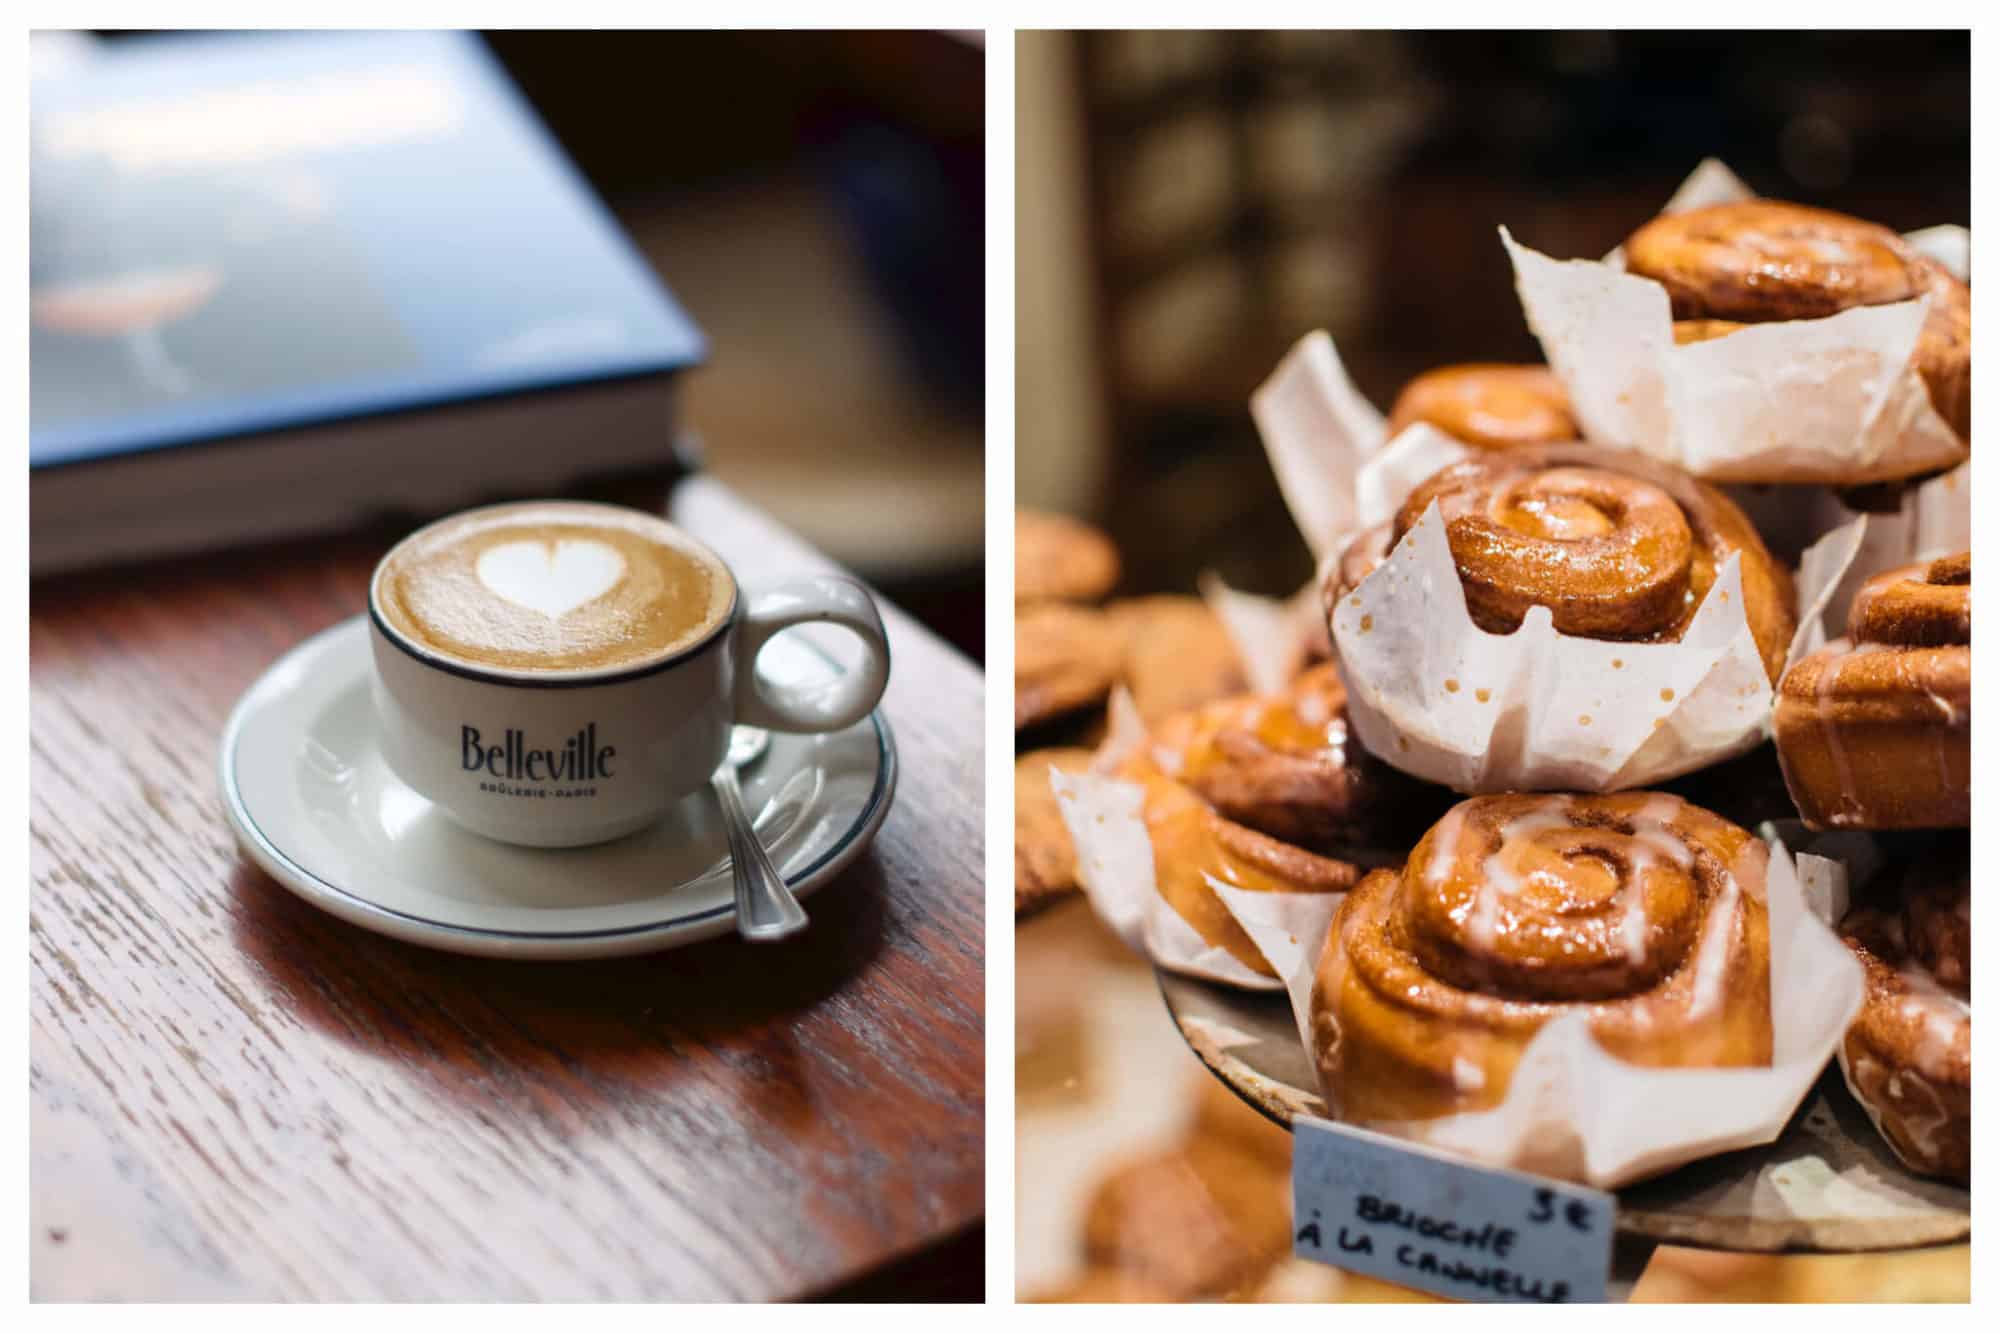 Left, a cup of frothy coffee on the wooden counter of La Fontaine de Belleville in Paris. Right, sticky cinnamon rolls stacked on the counter of a bakery in Paris.